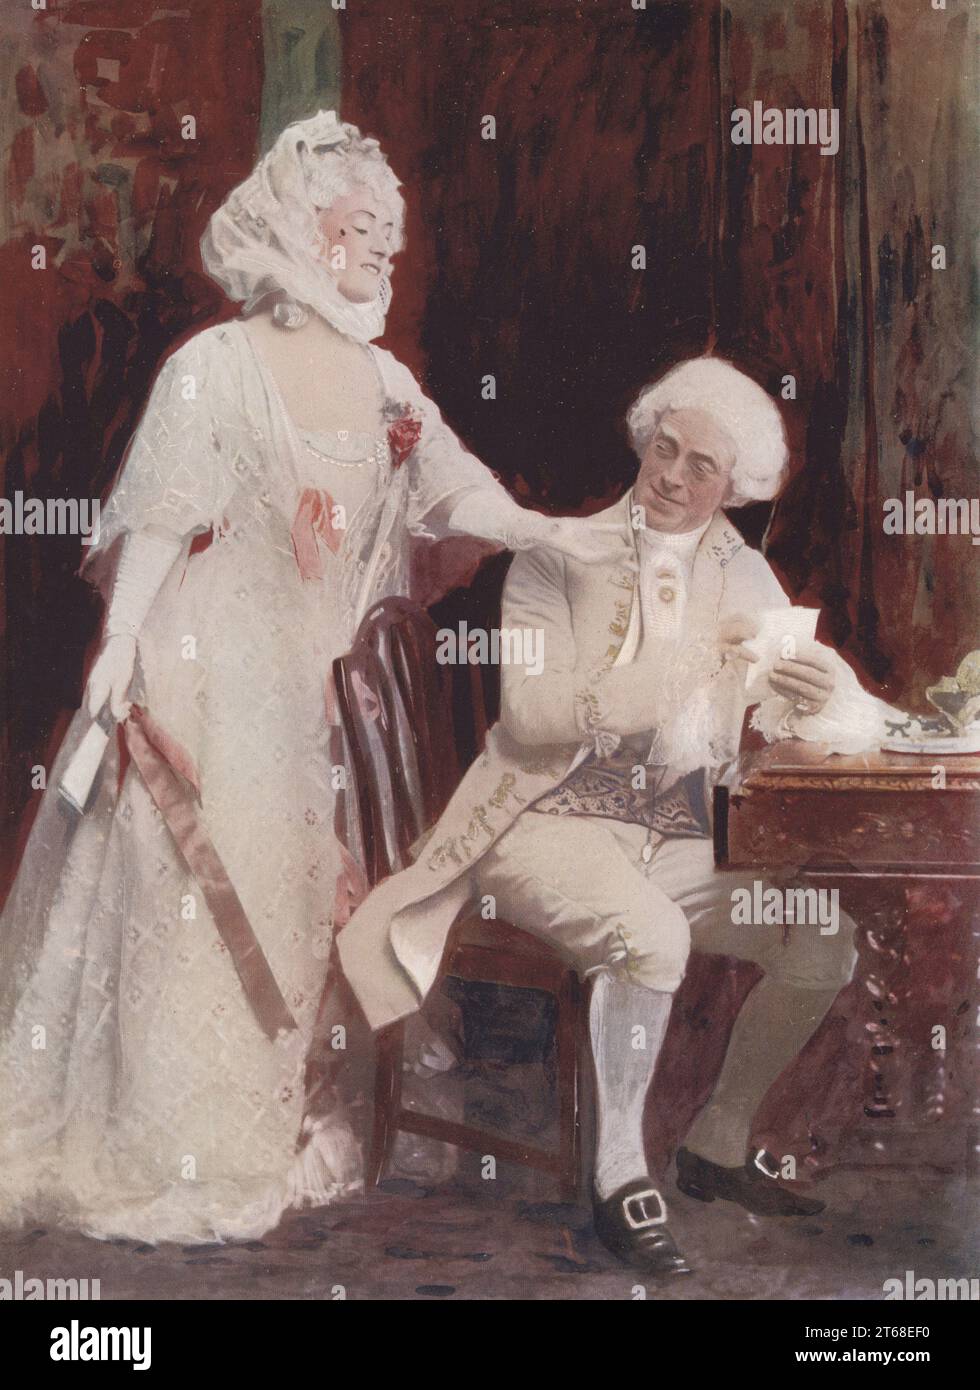 Winifred Emery and Cyril Maude in The School for Scandal, comedy by Richard Sheridan, Vaudeville Theatre, 1890.sca Cyril Maude, English actor manager, 1862-1951. Performing with his wife Maud Isabel Emery, English actress and actor manager, 1861-1924. Photograph by Window and Grove (Frederick Richard Window and William Henry Grove). Colour printing of a hand-coloured illustration based on a monochrome photograph from George Newness Players of the Day, London, 1905. Stock Photo